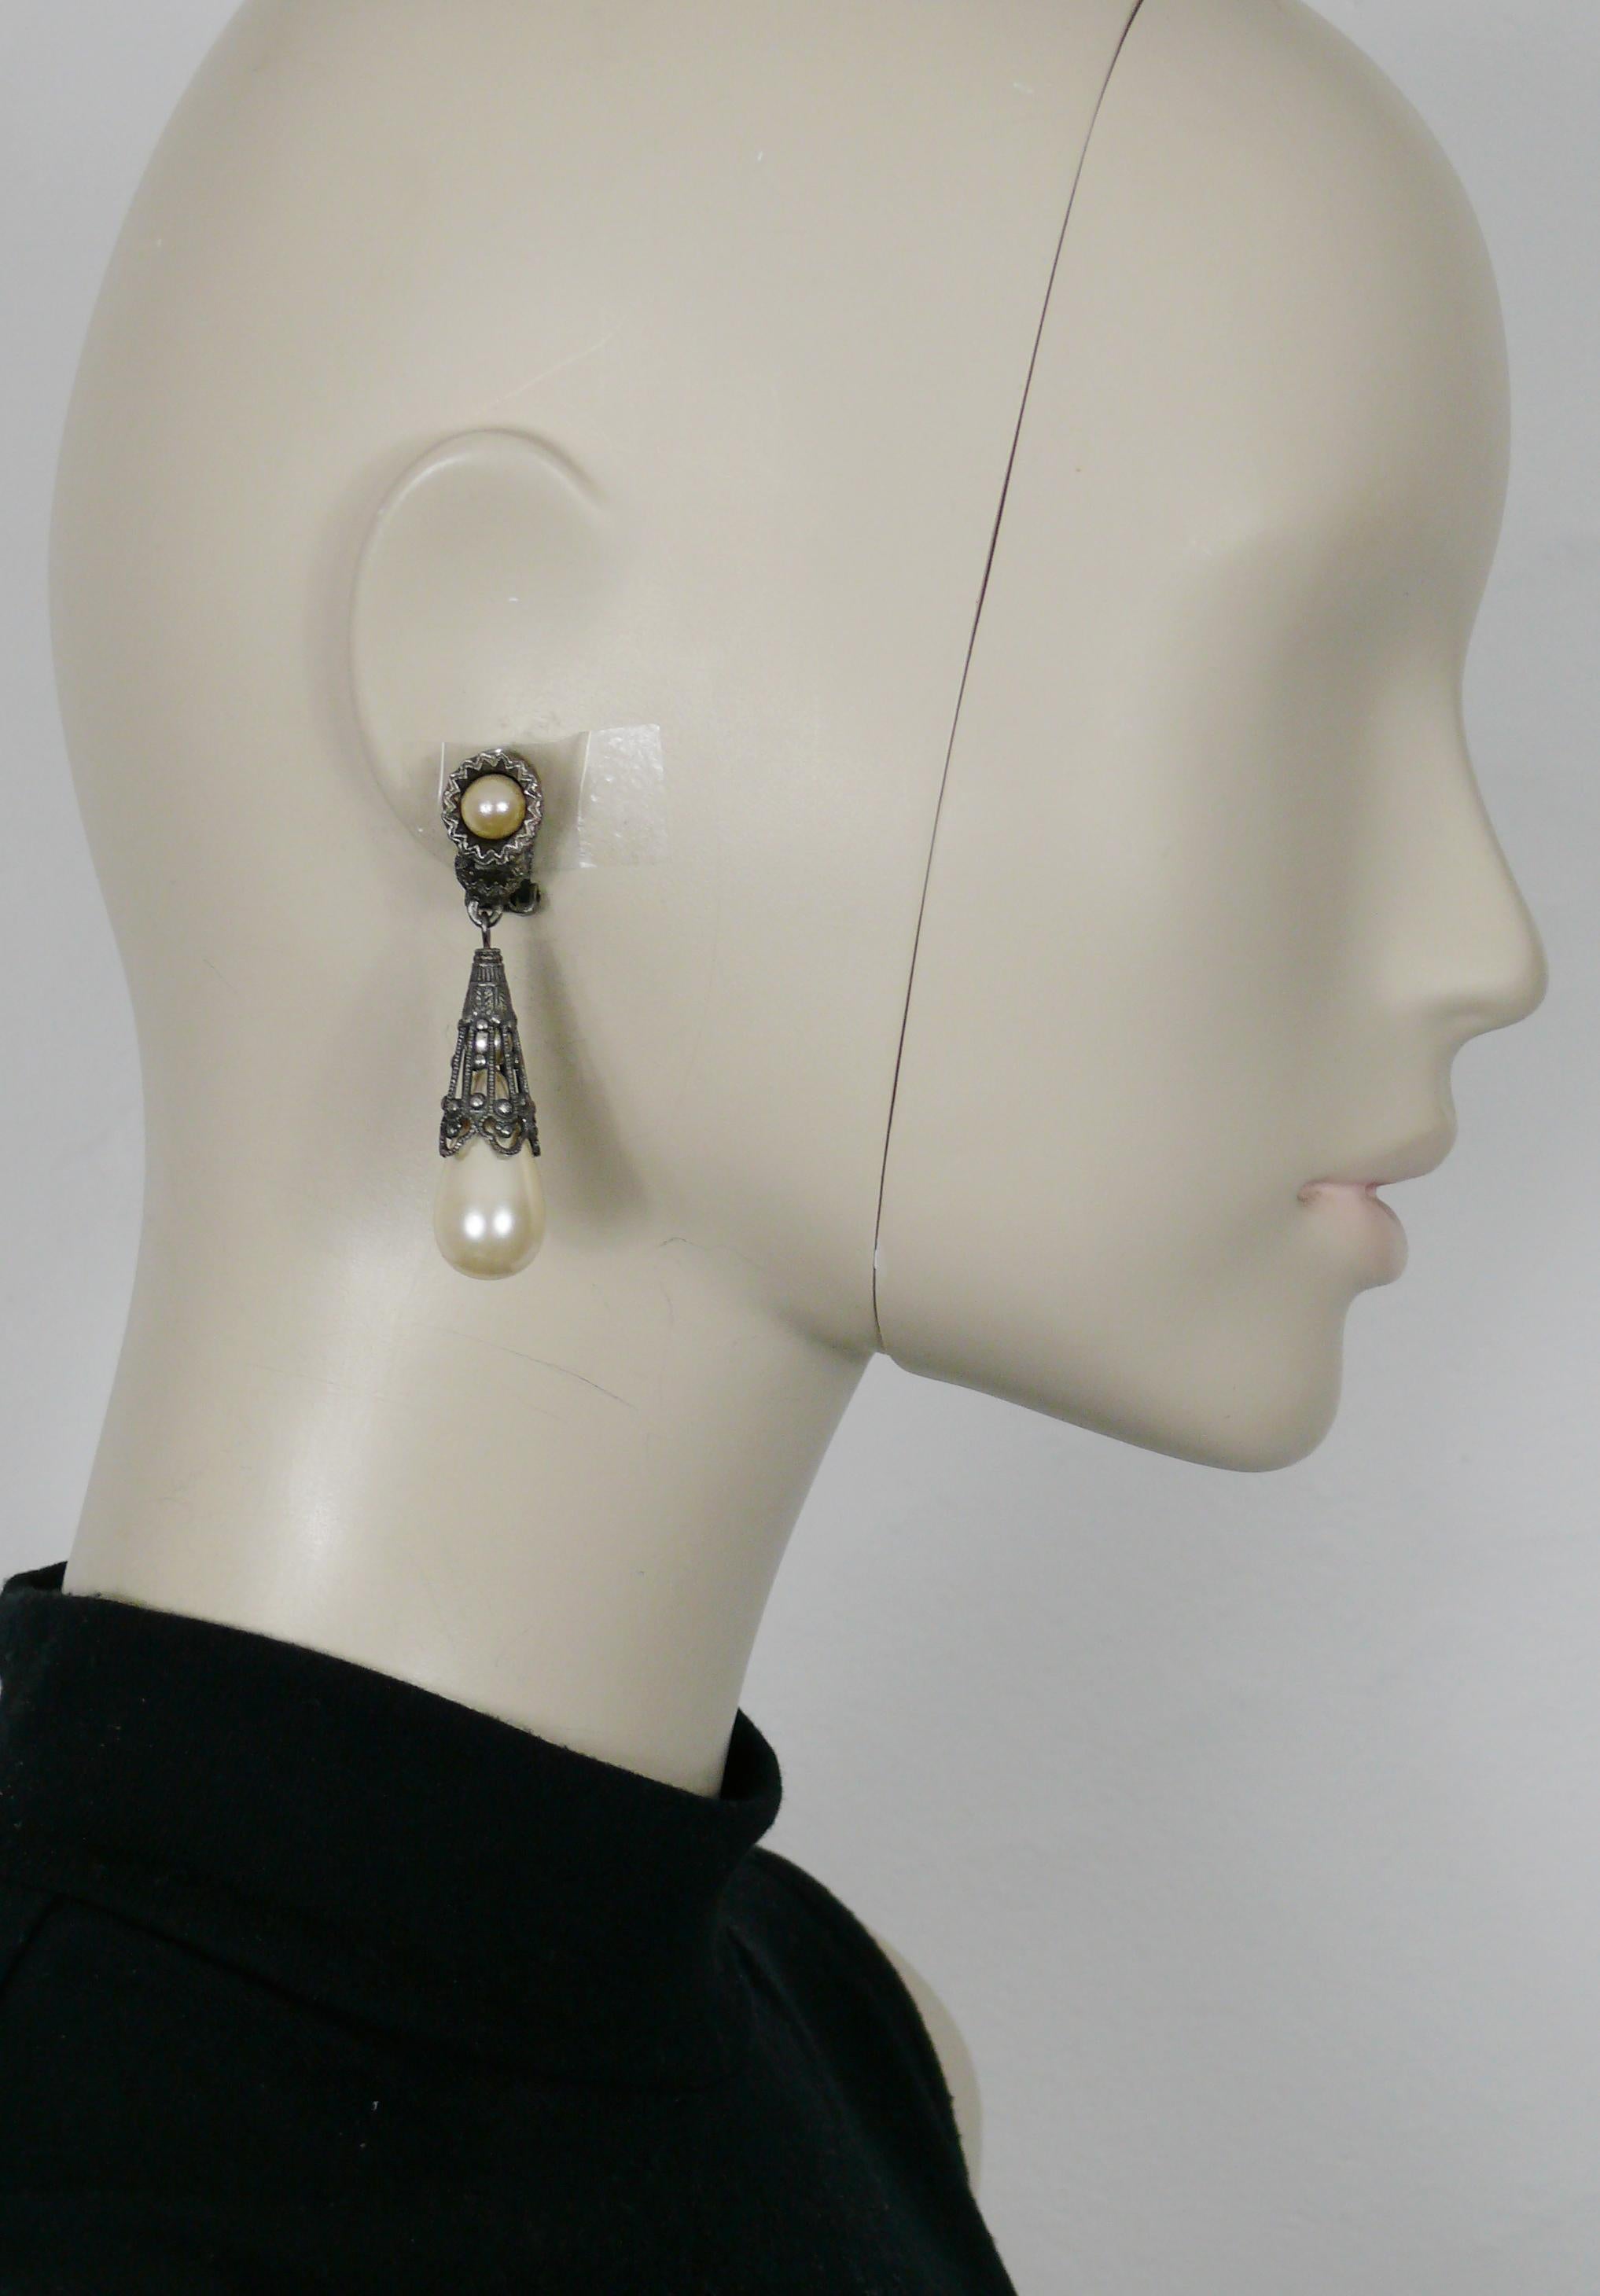 CHRISTIAN DIOR vintage oxidized gun patina dangling earrings (clip-on) embellished with faux pearls.

Marked CHR. DIOR Germany.

Indicative measurements : height approx. 6.1 cm (2.40 inches) / max width approx.  1.3 cm (0.51 inch).

Weight per